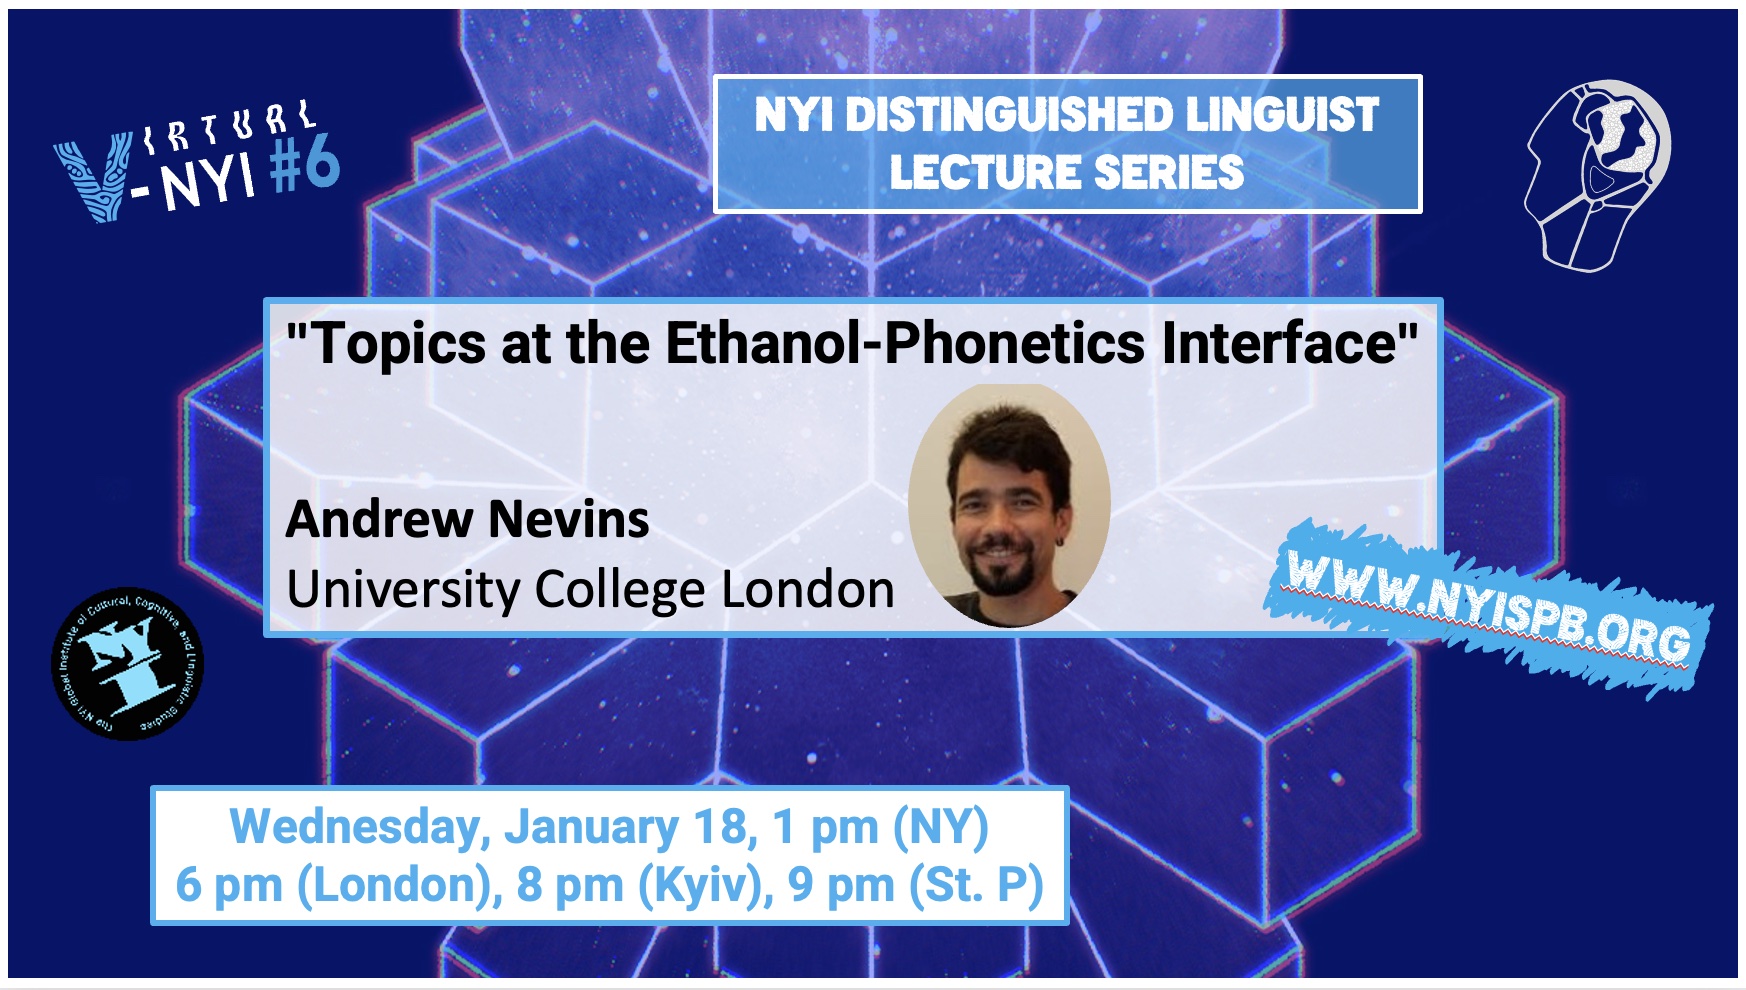 Distinguished Linguist Lecture #2: Andrew Nevins